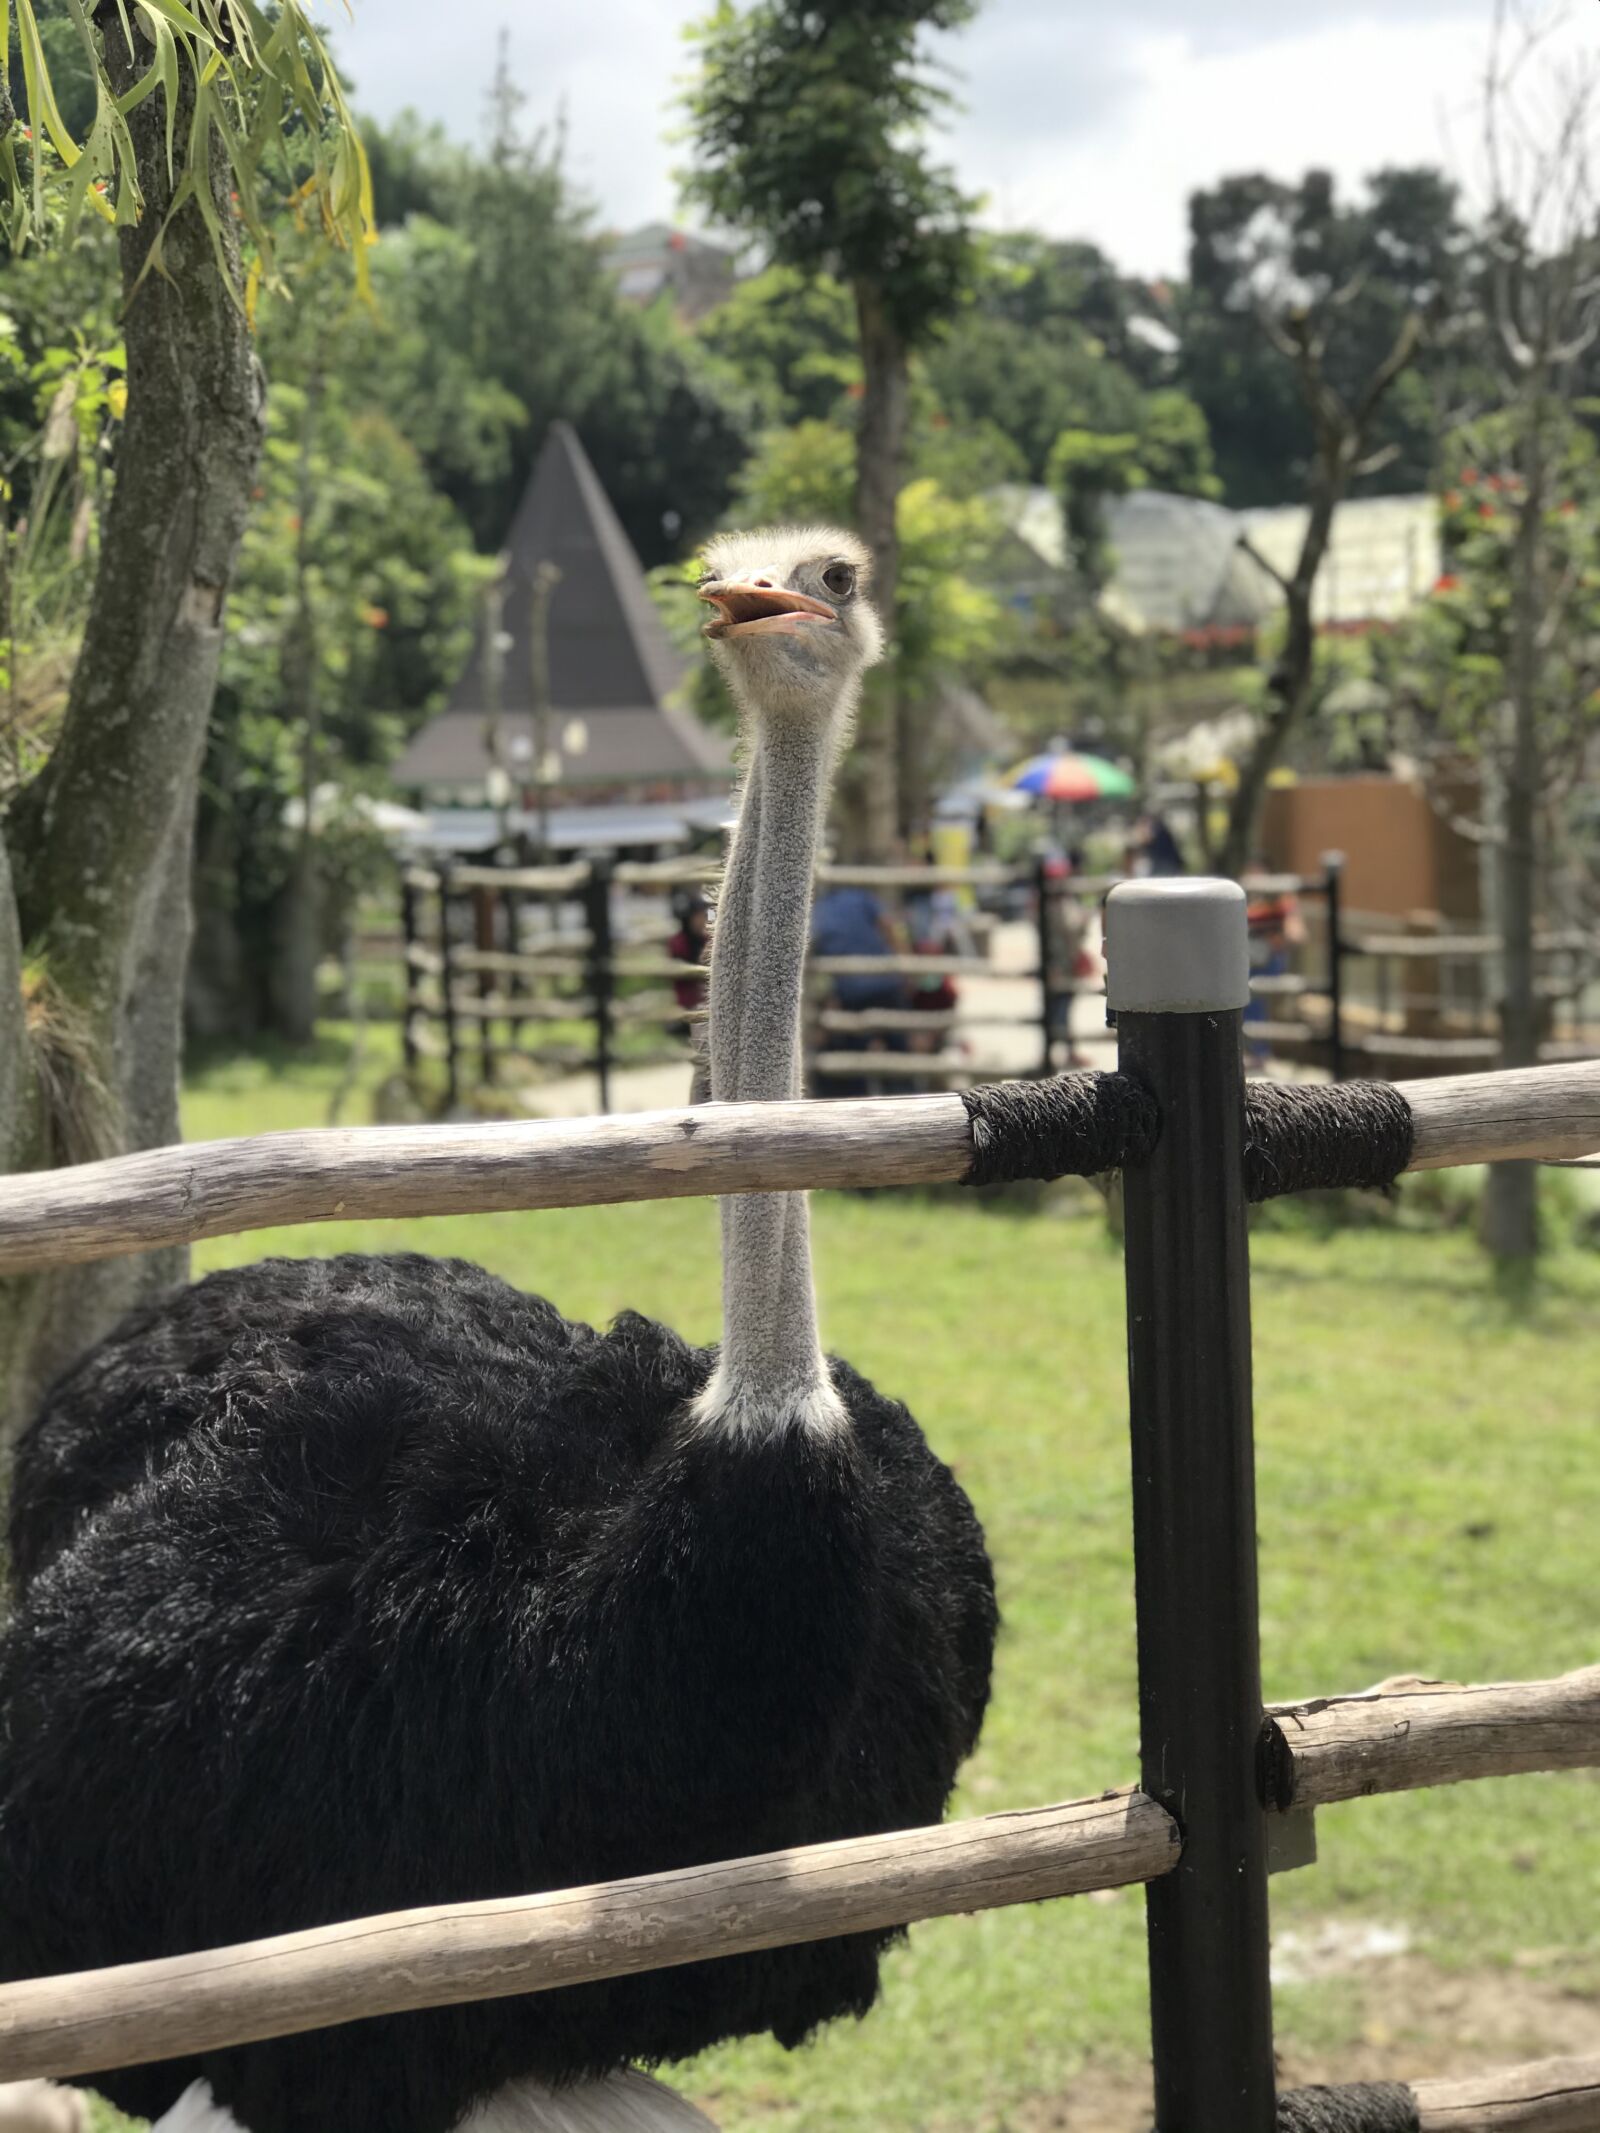 Apple iPhone 7 Plus sample photo. Ostrich, zoo, animal photography